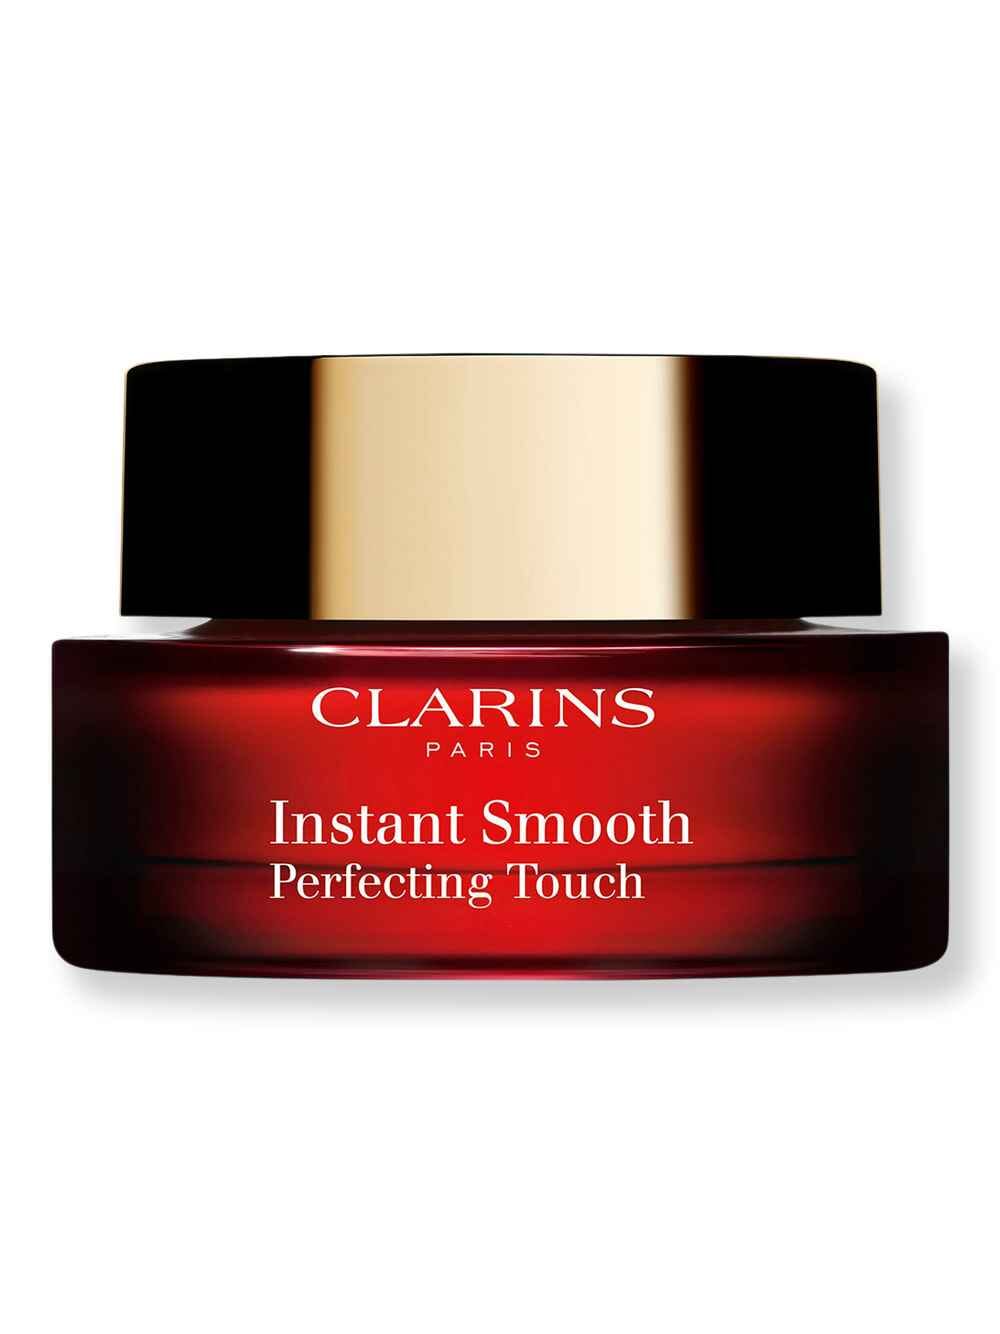 Clarins Clarins Instant Smooth Perfecting Touch Makeup Primer 0.5 oz Face Primers 